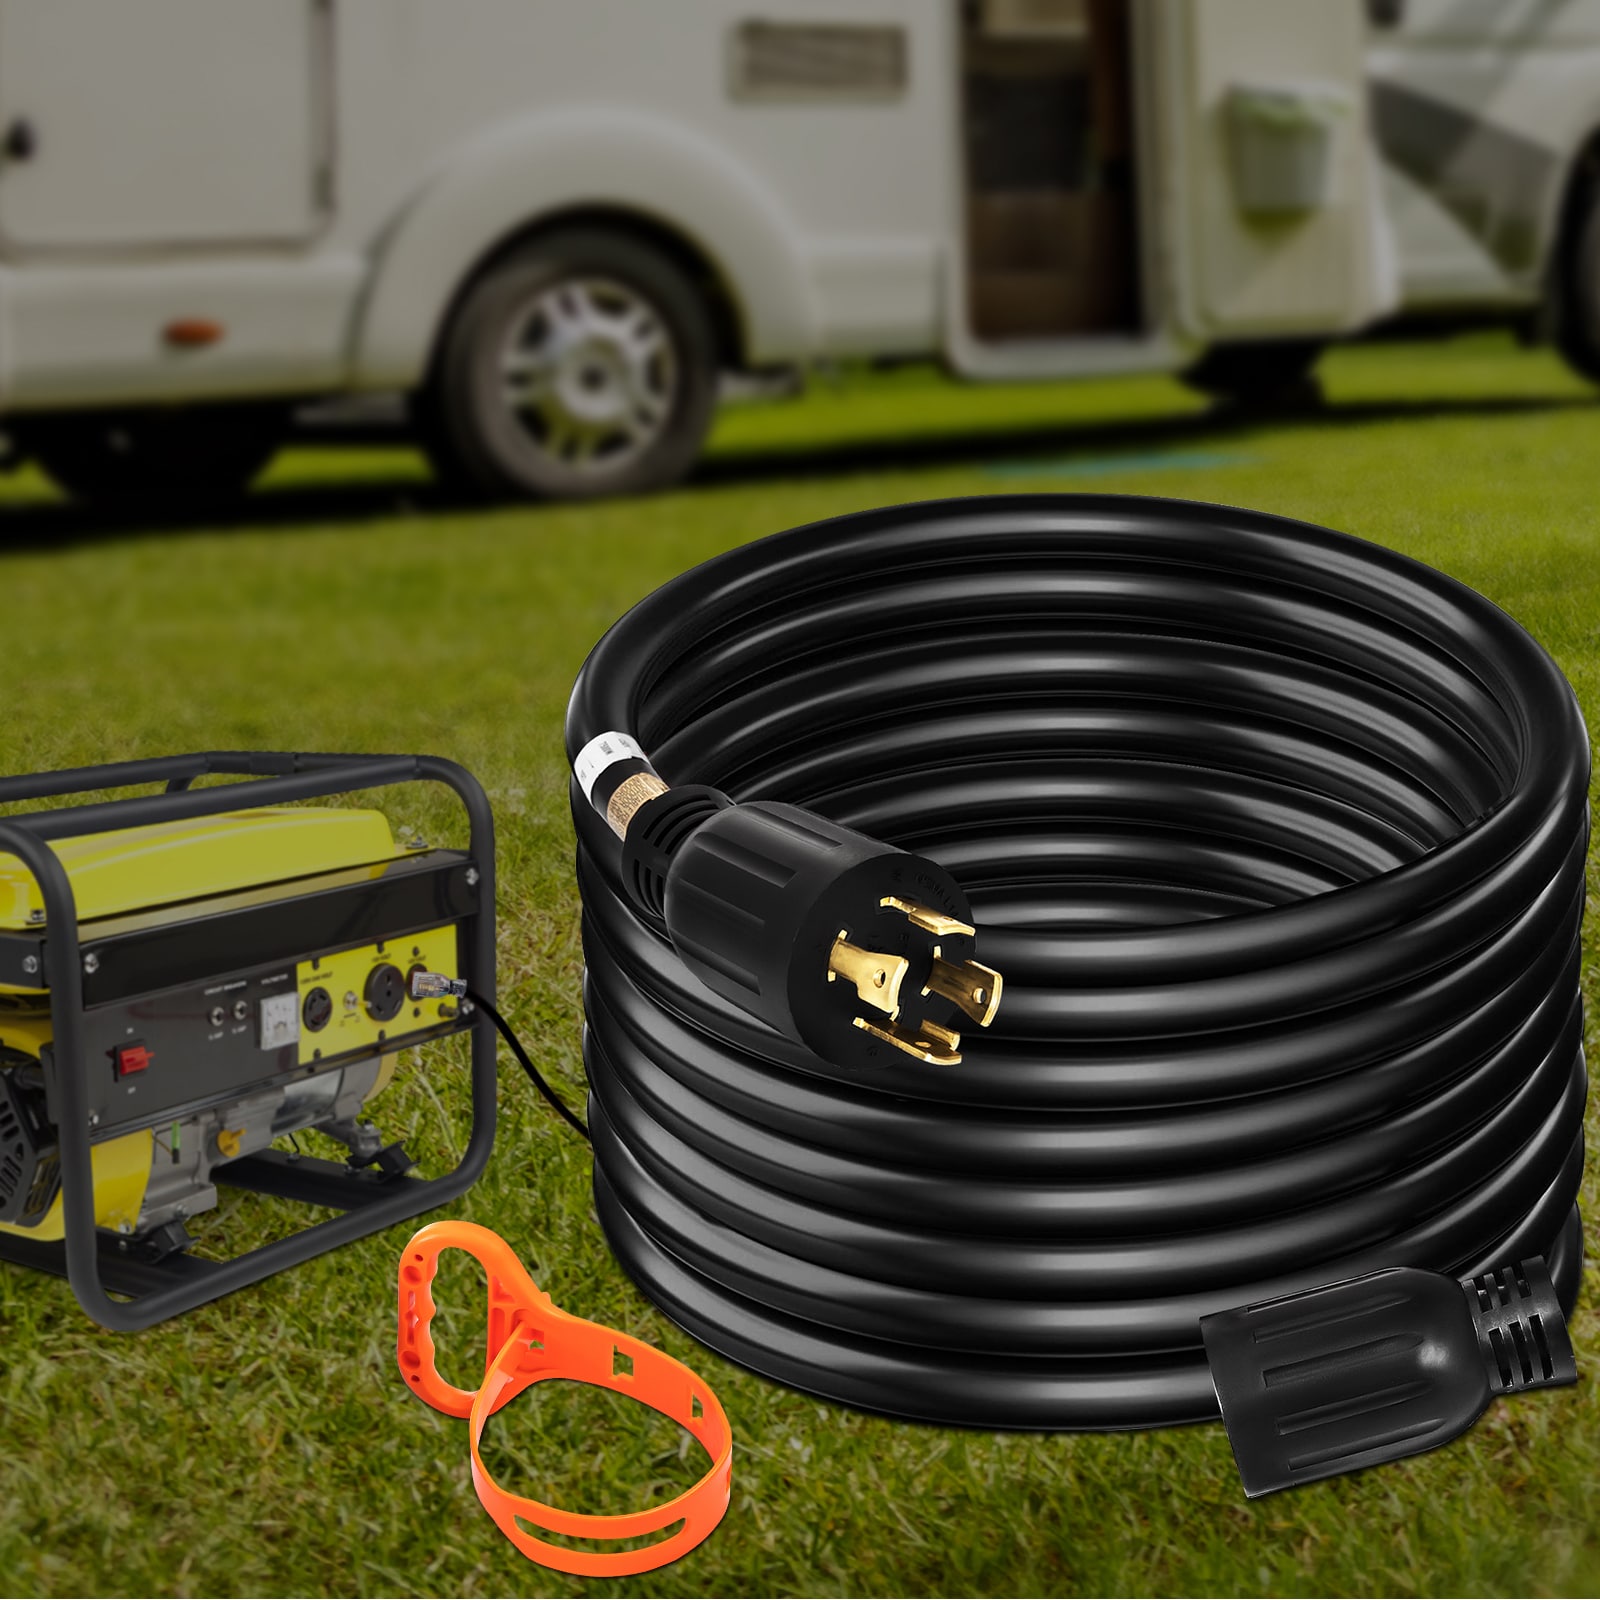  Yodotek 40FT Heavy Duty Generator Locking Power Cord NEMA  L14-30P/L14-30R,4 Prong 10 Gauge SJTW Cable, 125/250V 30Amp 7500 Watts  Yellow Generator Lock Extension Cord with UL Listed : Patio, Lawn 